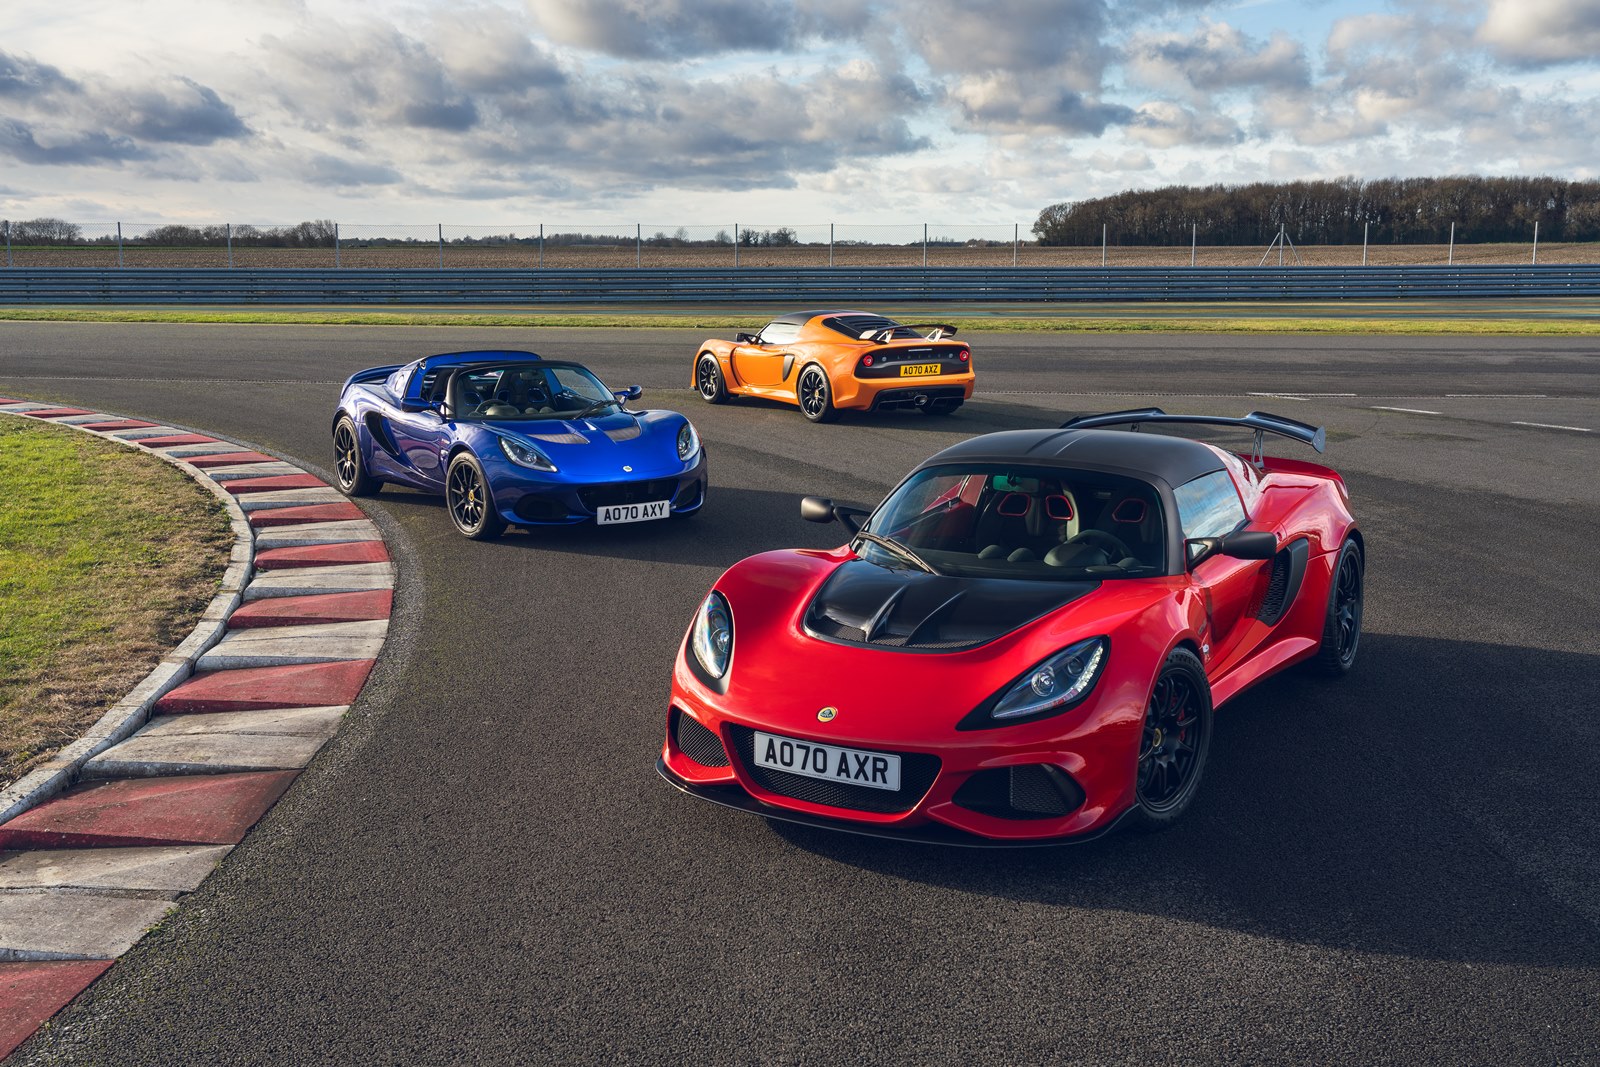 This is the Lotus Elise and Exige Final Edition: the final point